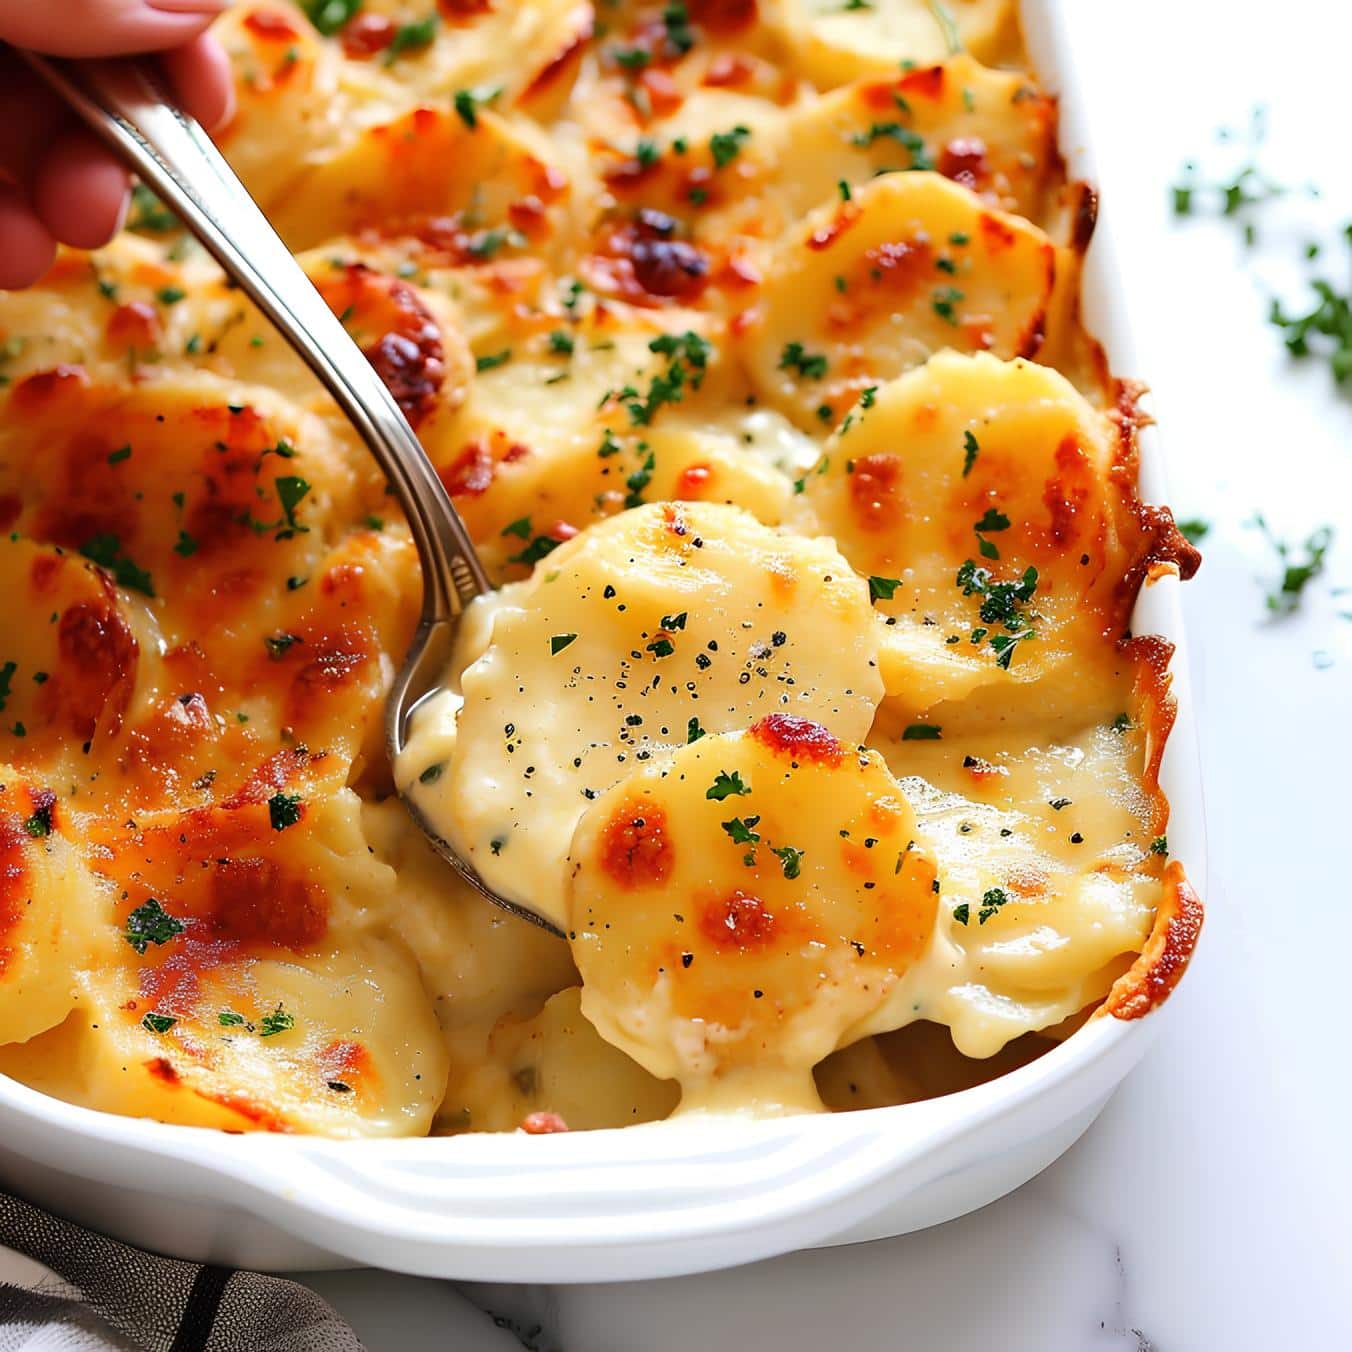 Scalloped potatoes with herbs in a white casserole